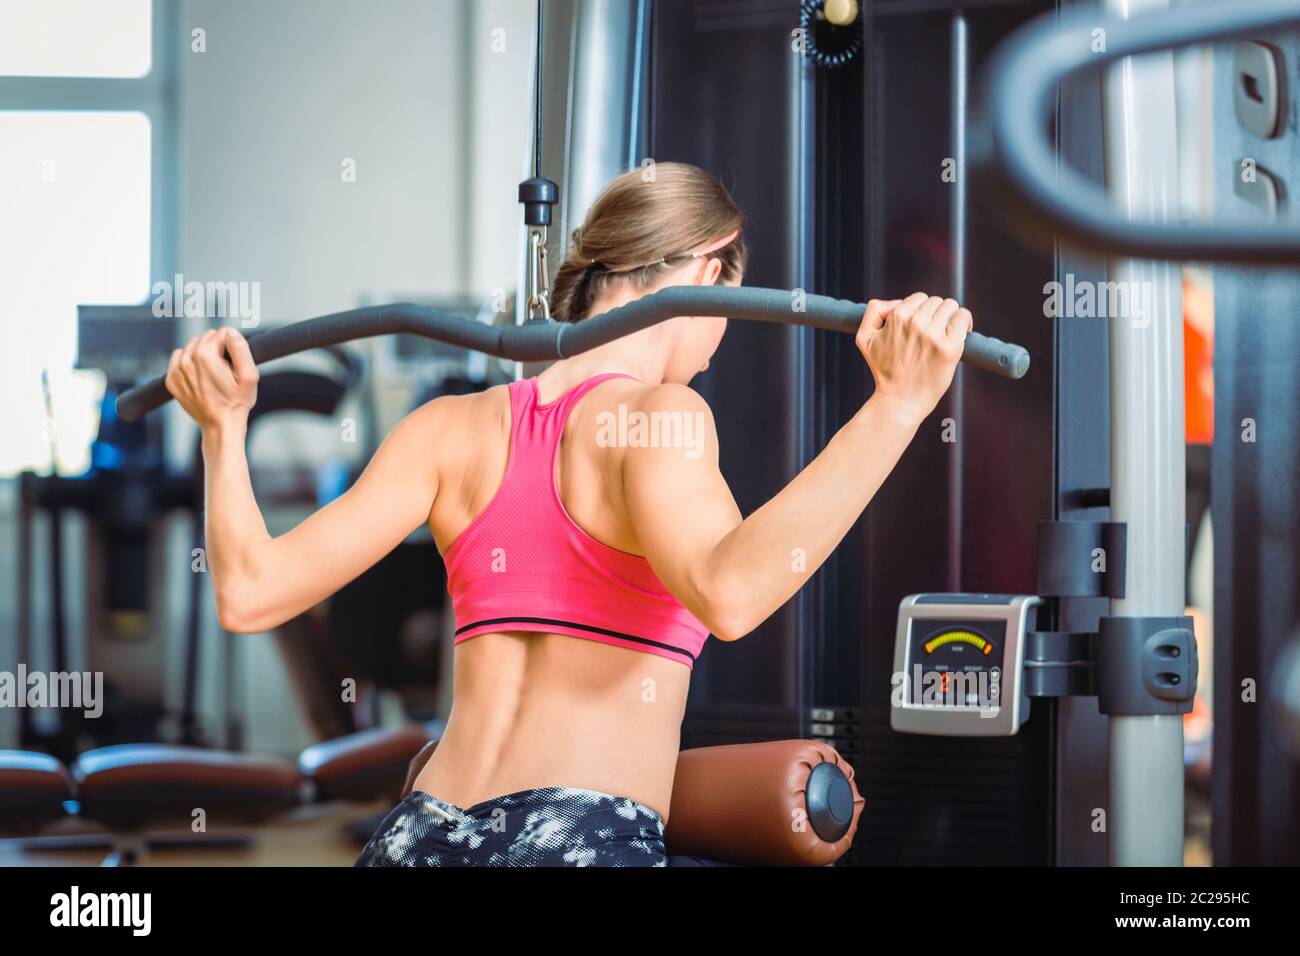 Rear view of a strong fit woman exercising lat pushdown behind the